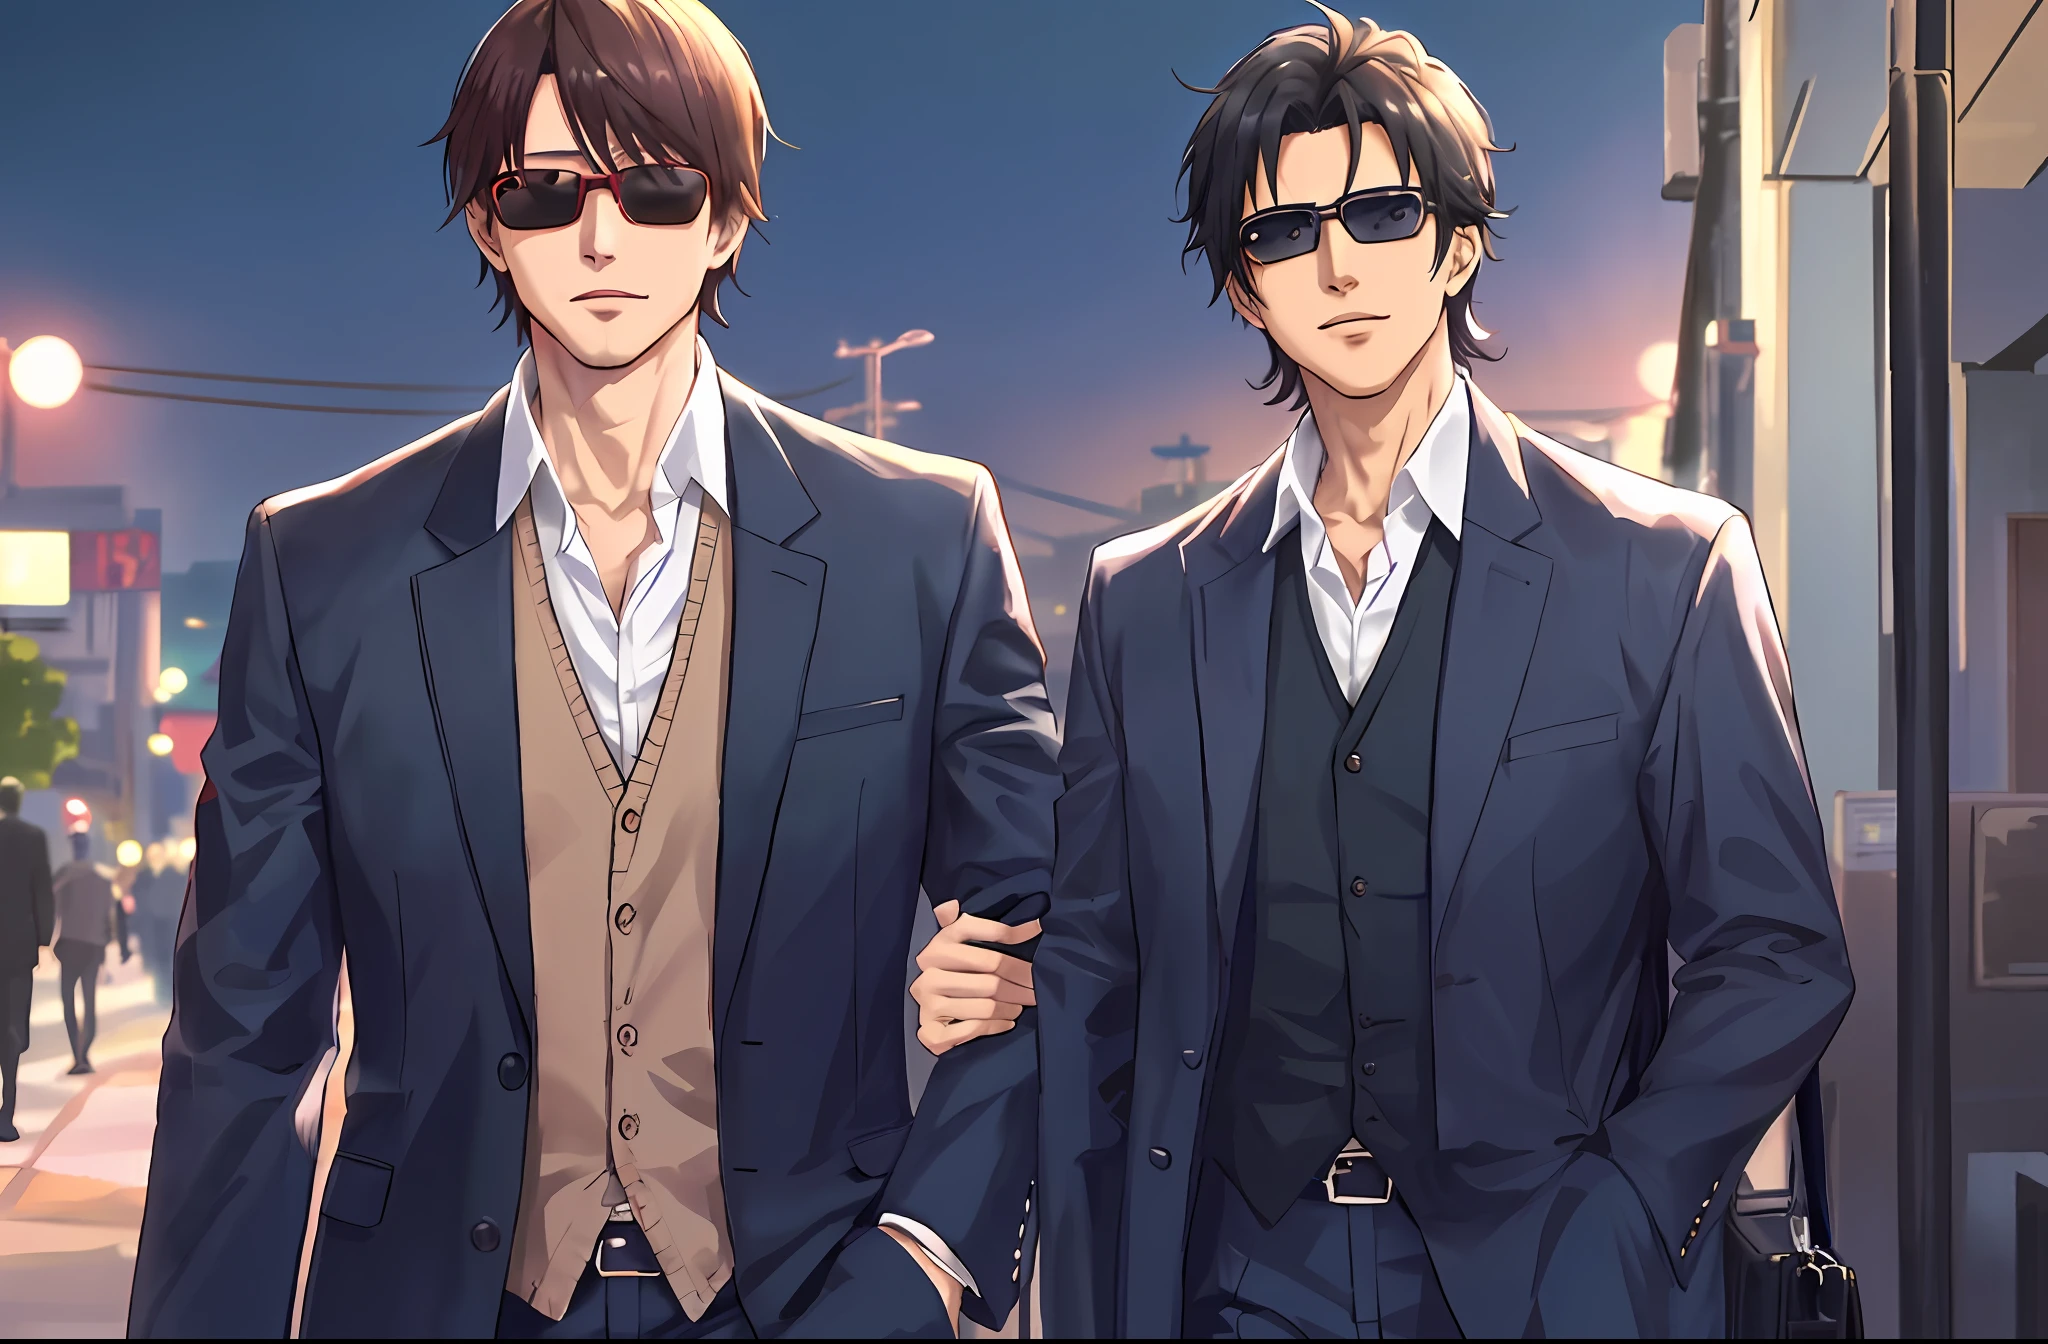 Two men in suits and sunglasses walking down a street - SeaArt AI